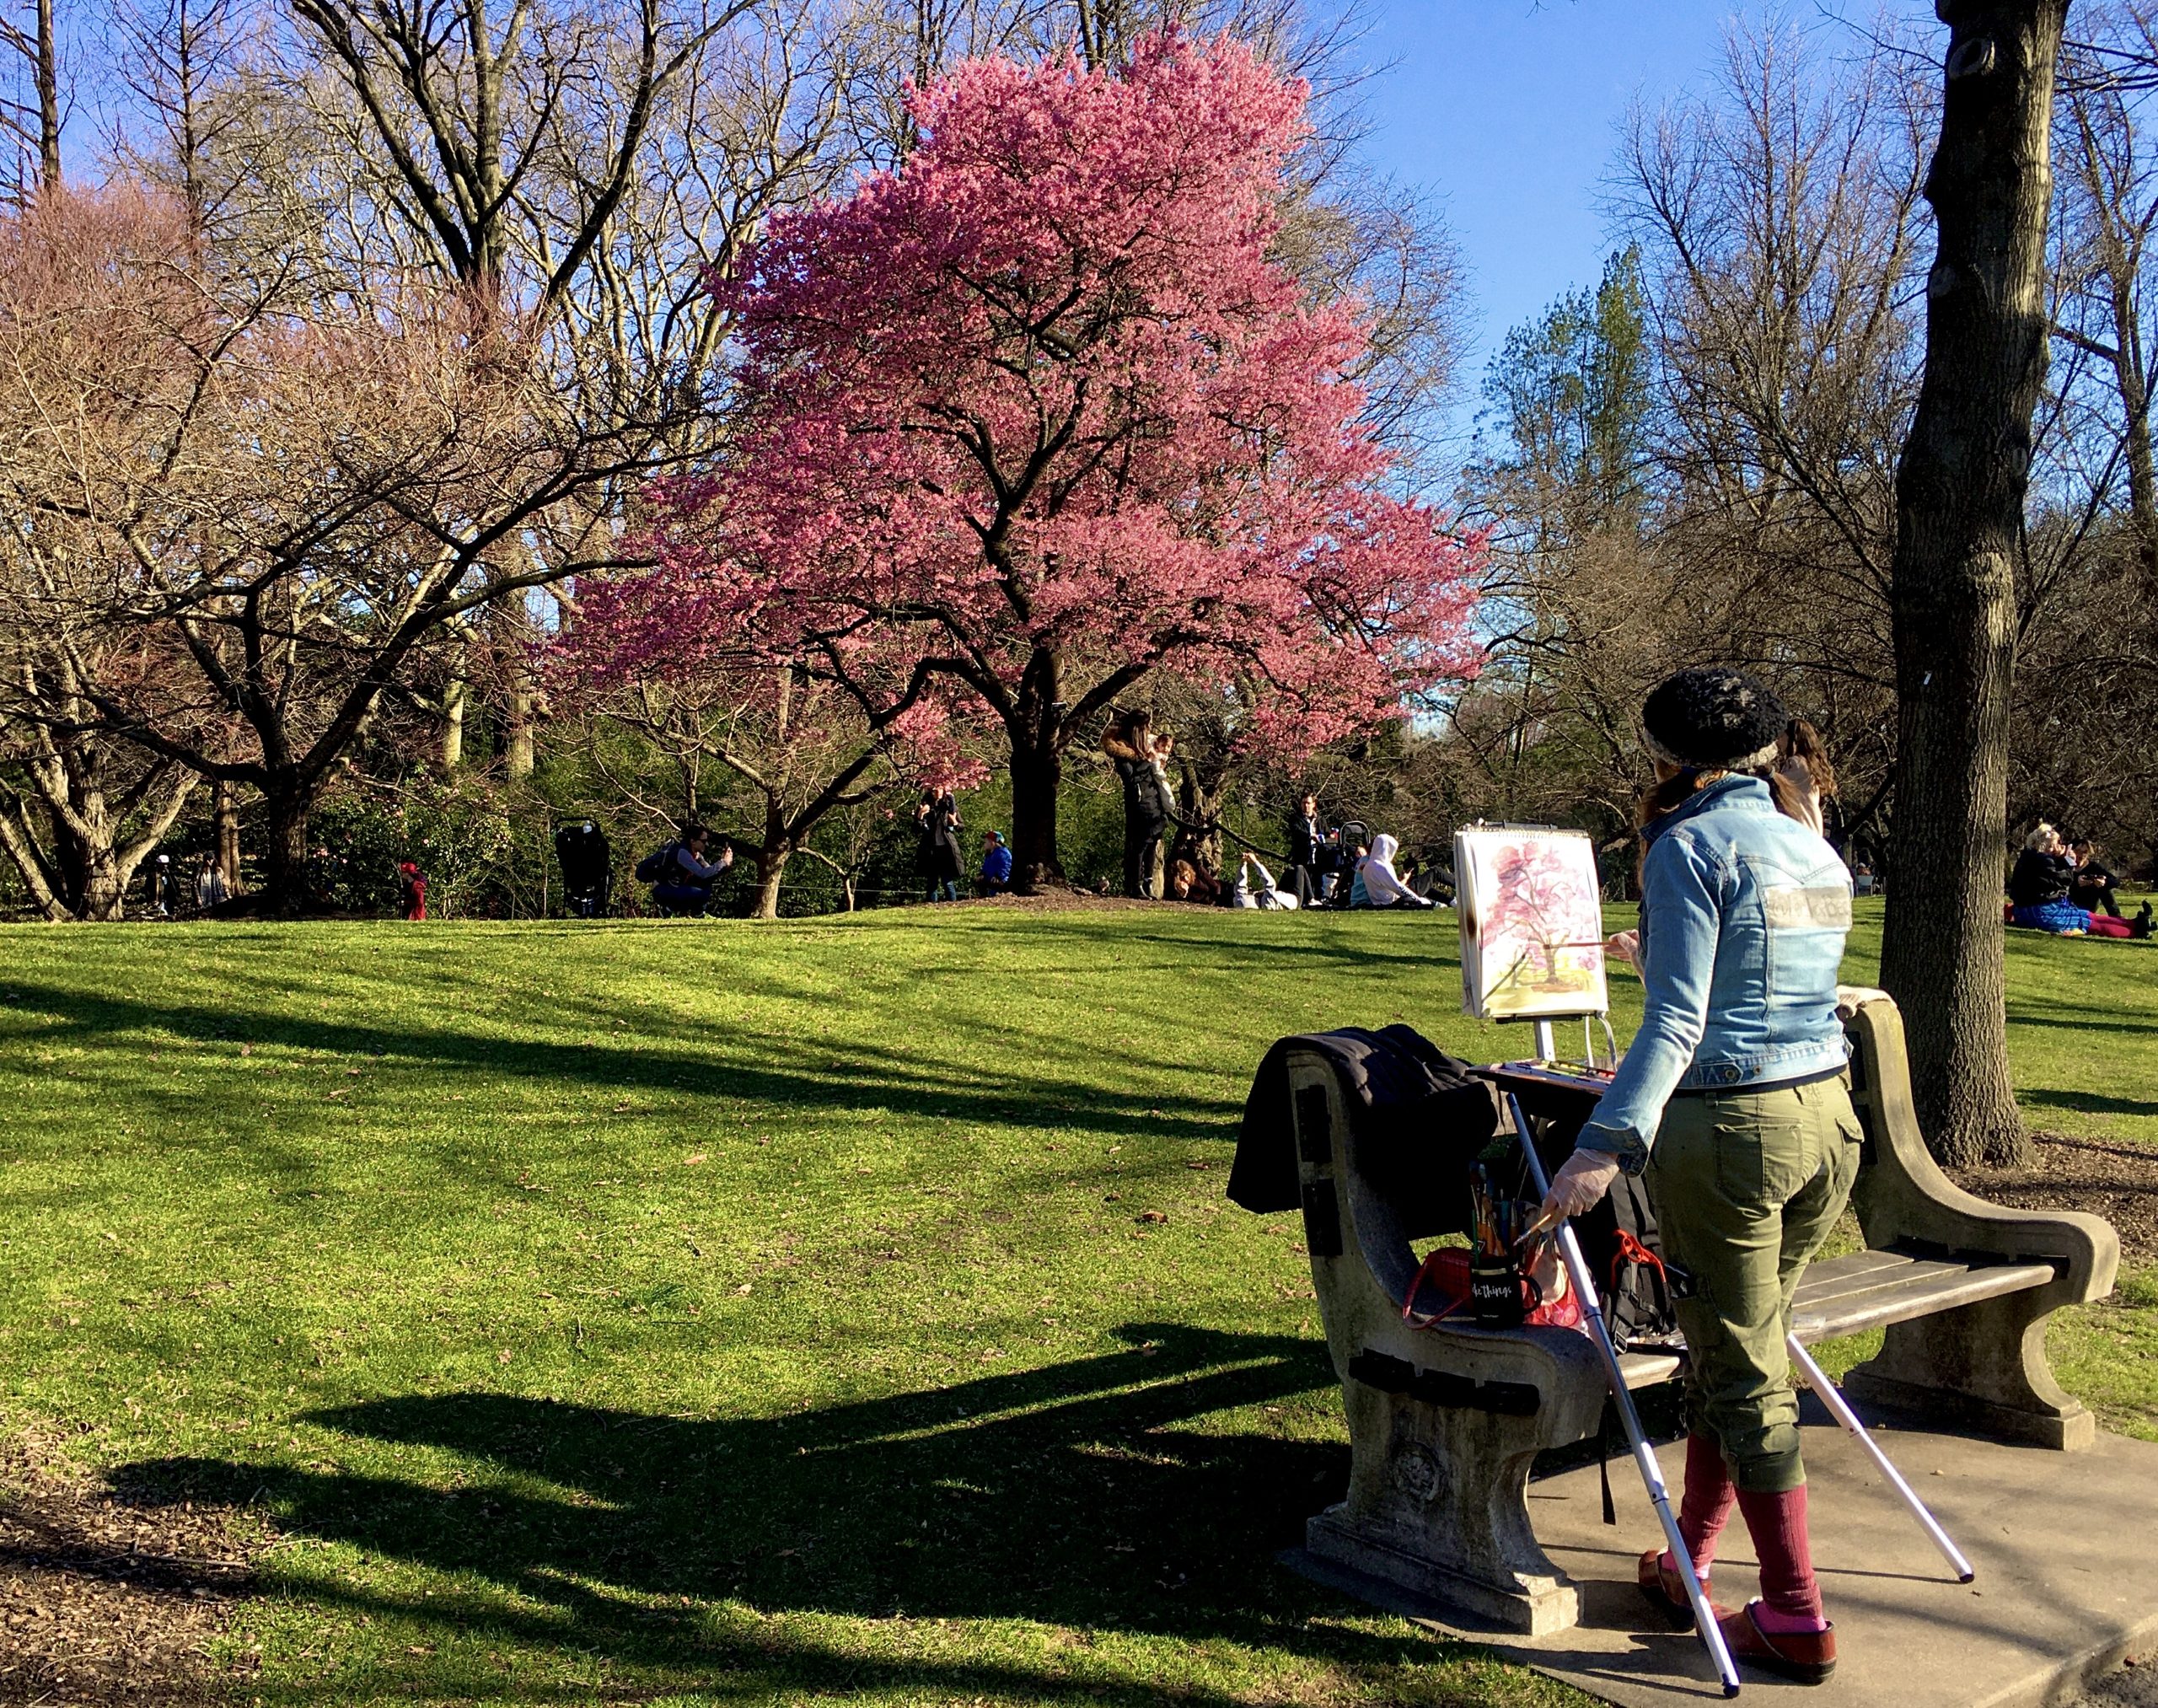 One tree near the Cherry Esplanade was full of bright blossoms. Photo: Lore Croghan/Brooklyn Eagle